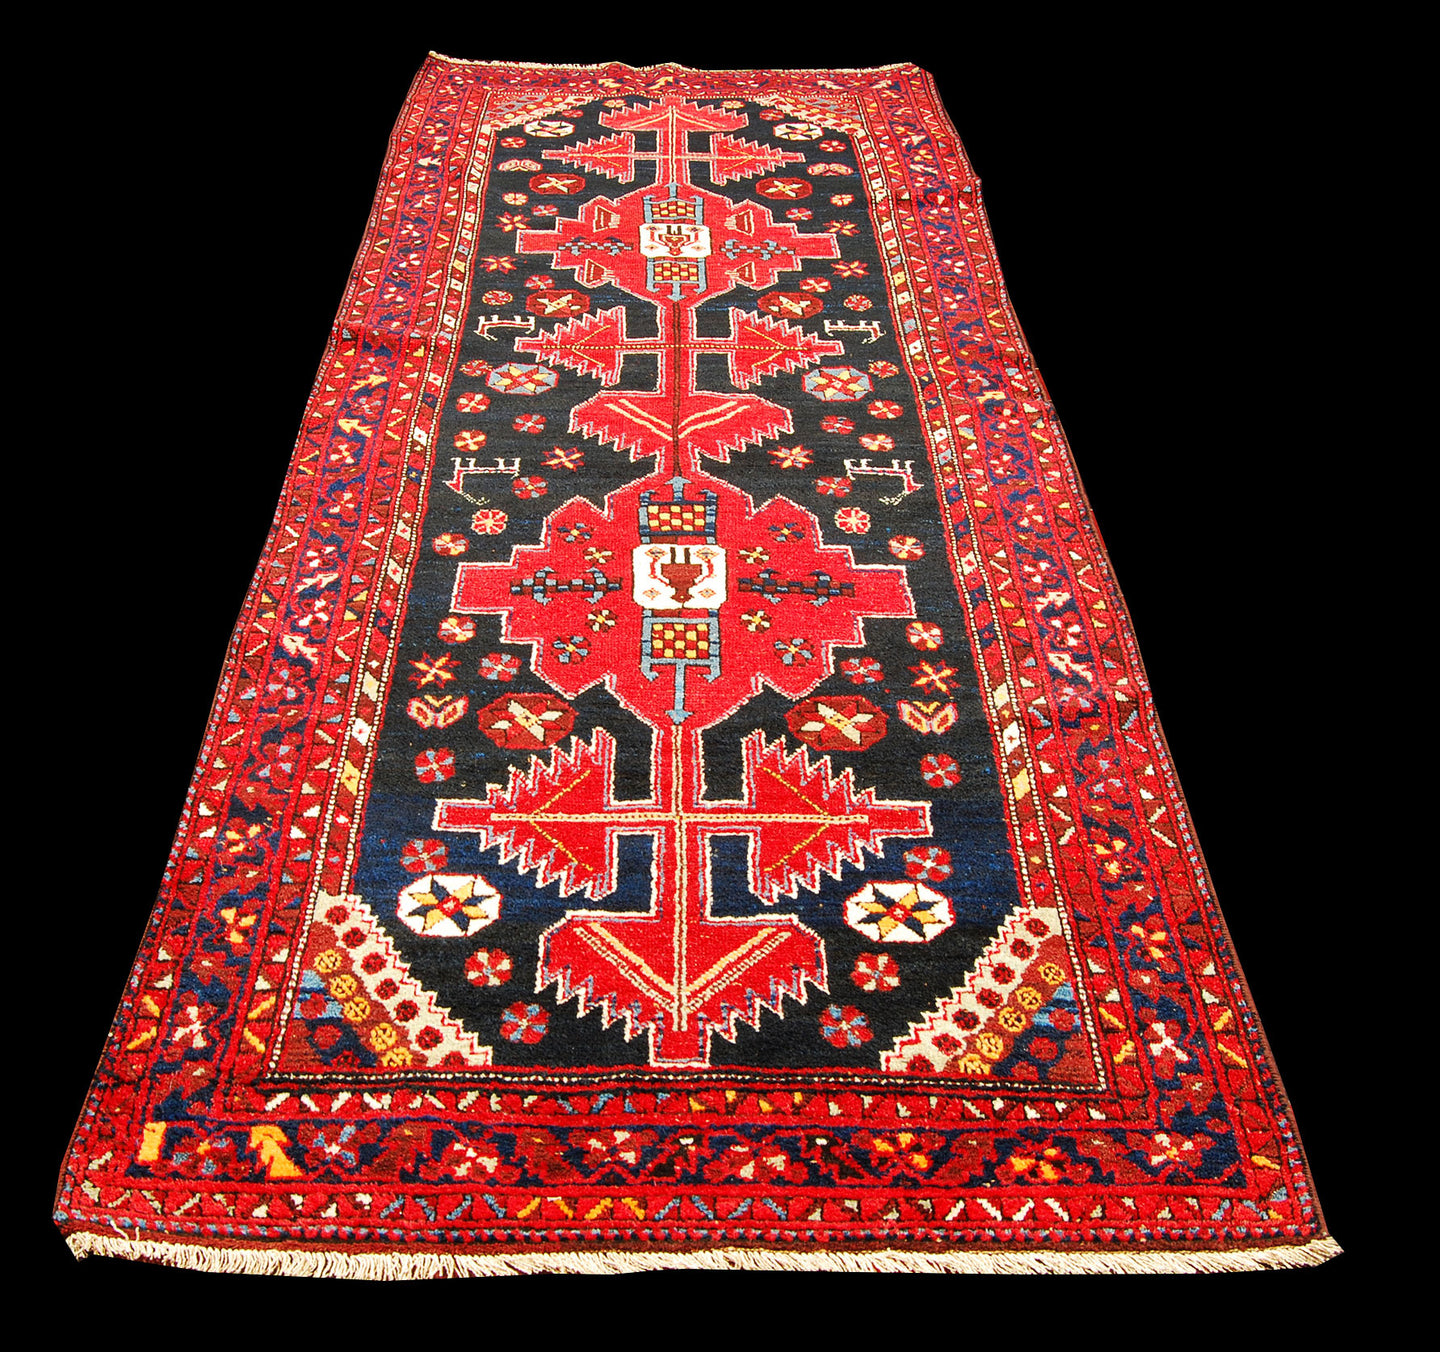 Bakhtyaty Ancient Antique Original Hand Made Carpets Tapis Teppich CM 230x135